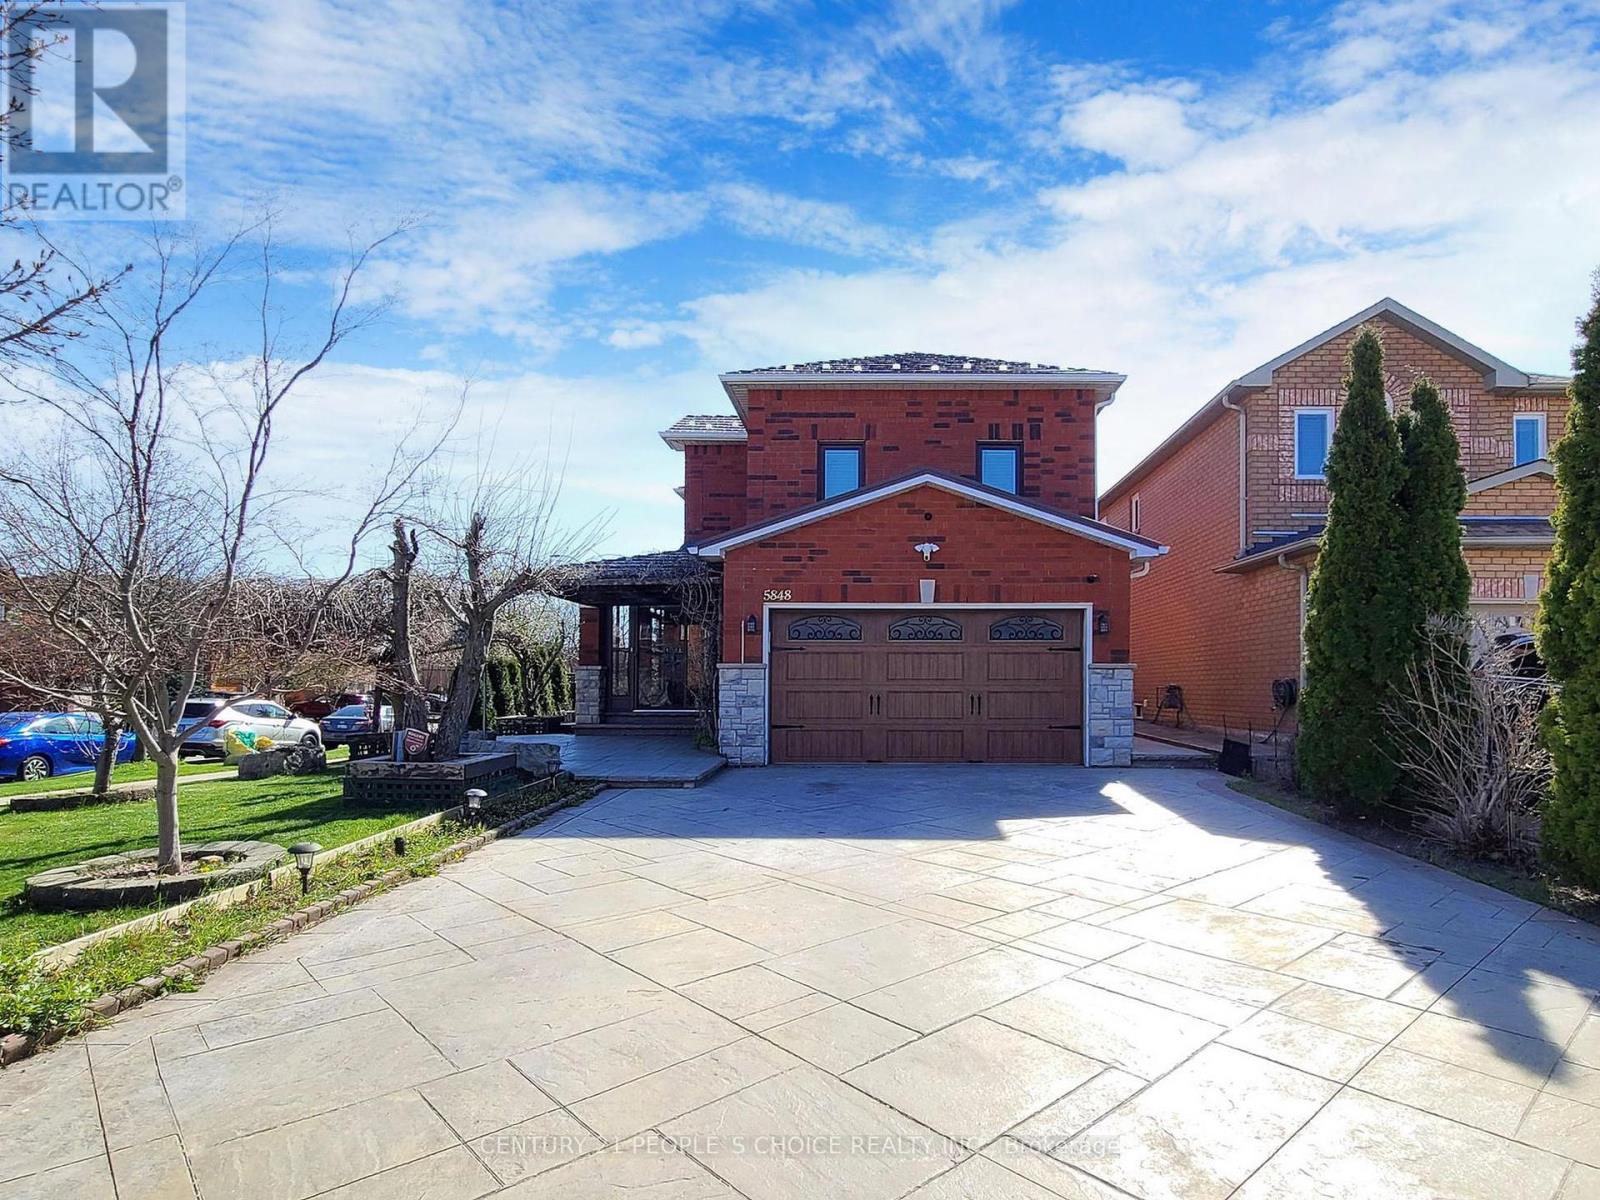 5848 SIDMOUTH ST, mississauga, Ontario